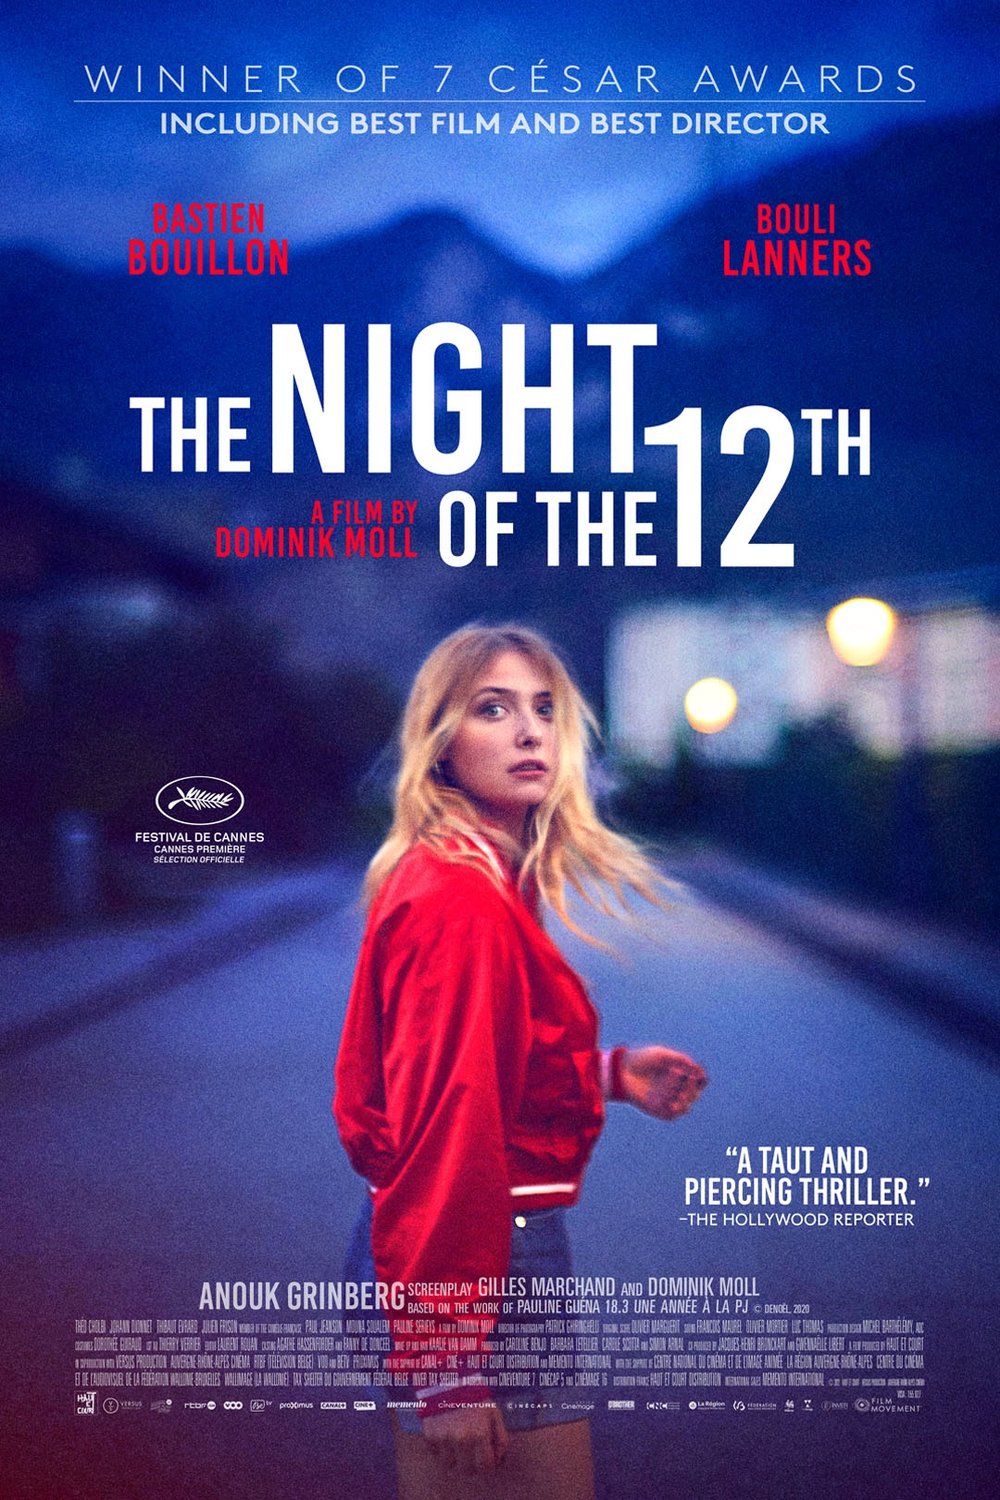 The Night of the 12th (2022) by Dominik Moll